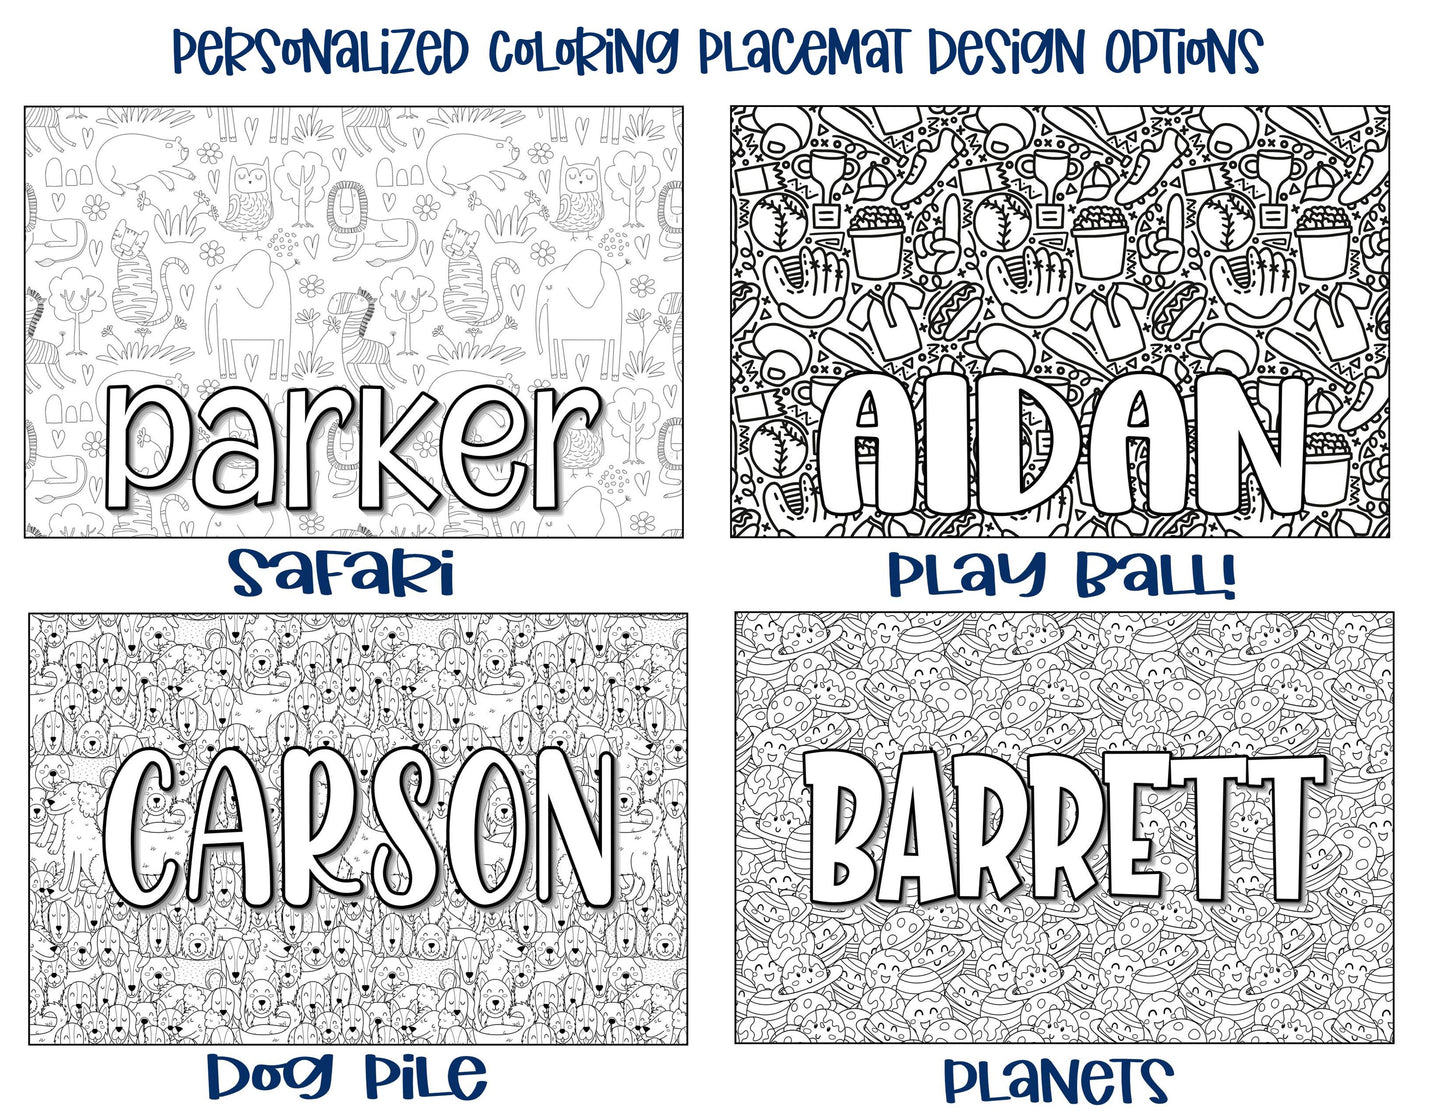 Personalized Coloring Name Placemat